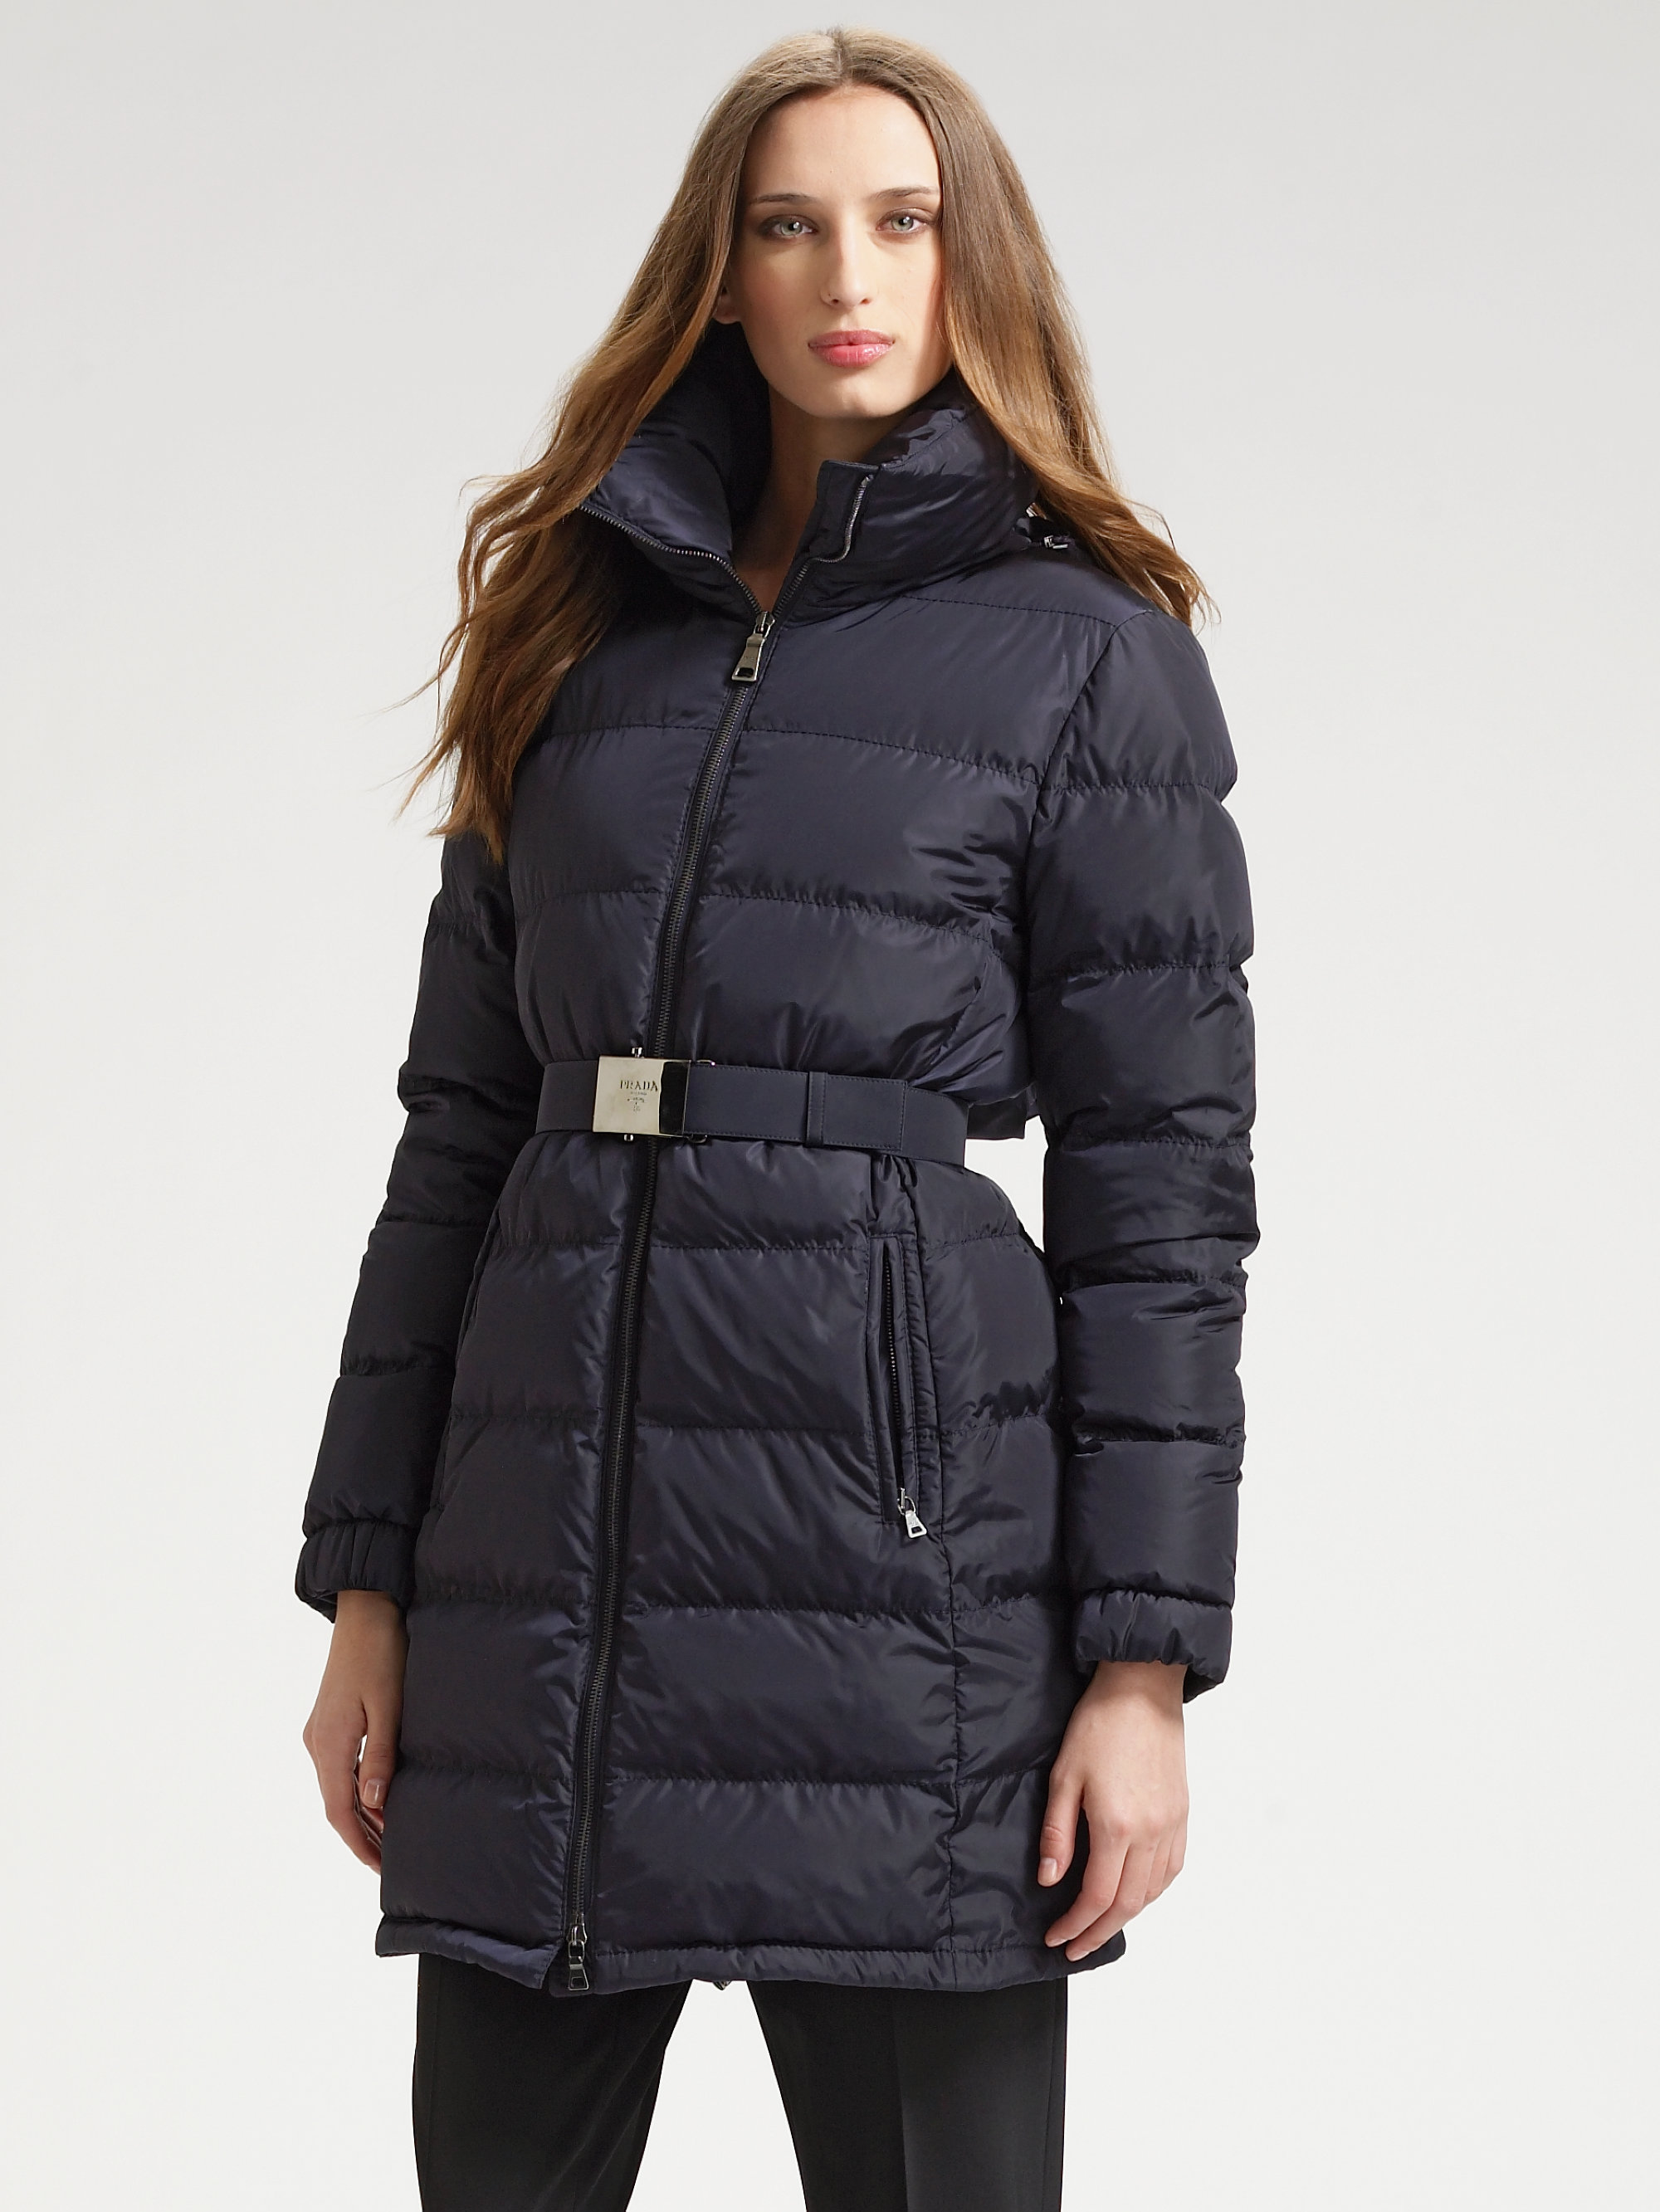 Prada Quilted Belted Down Jacket in Black | Lyst